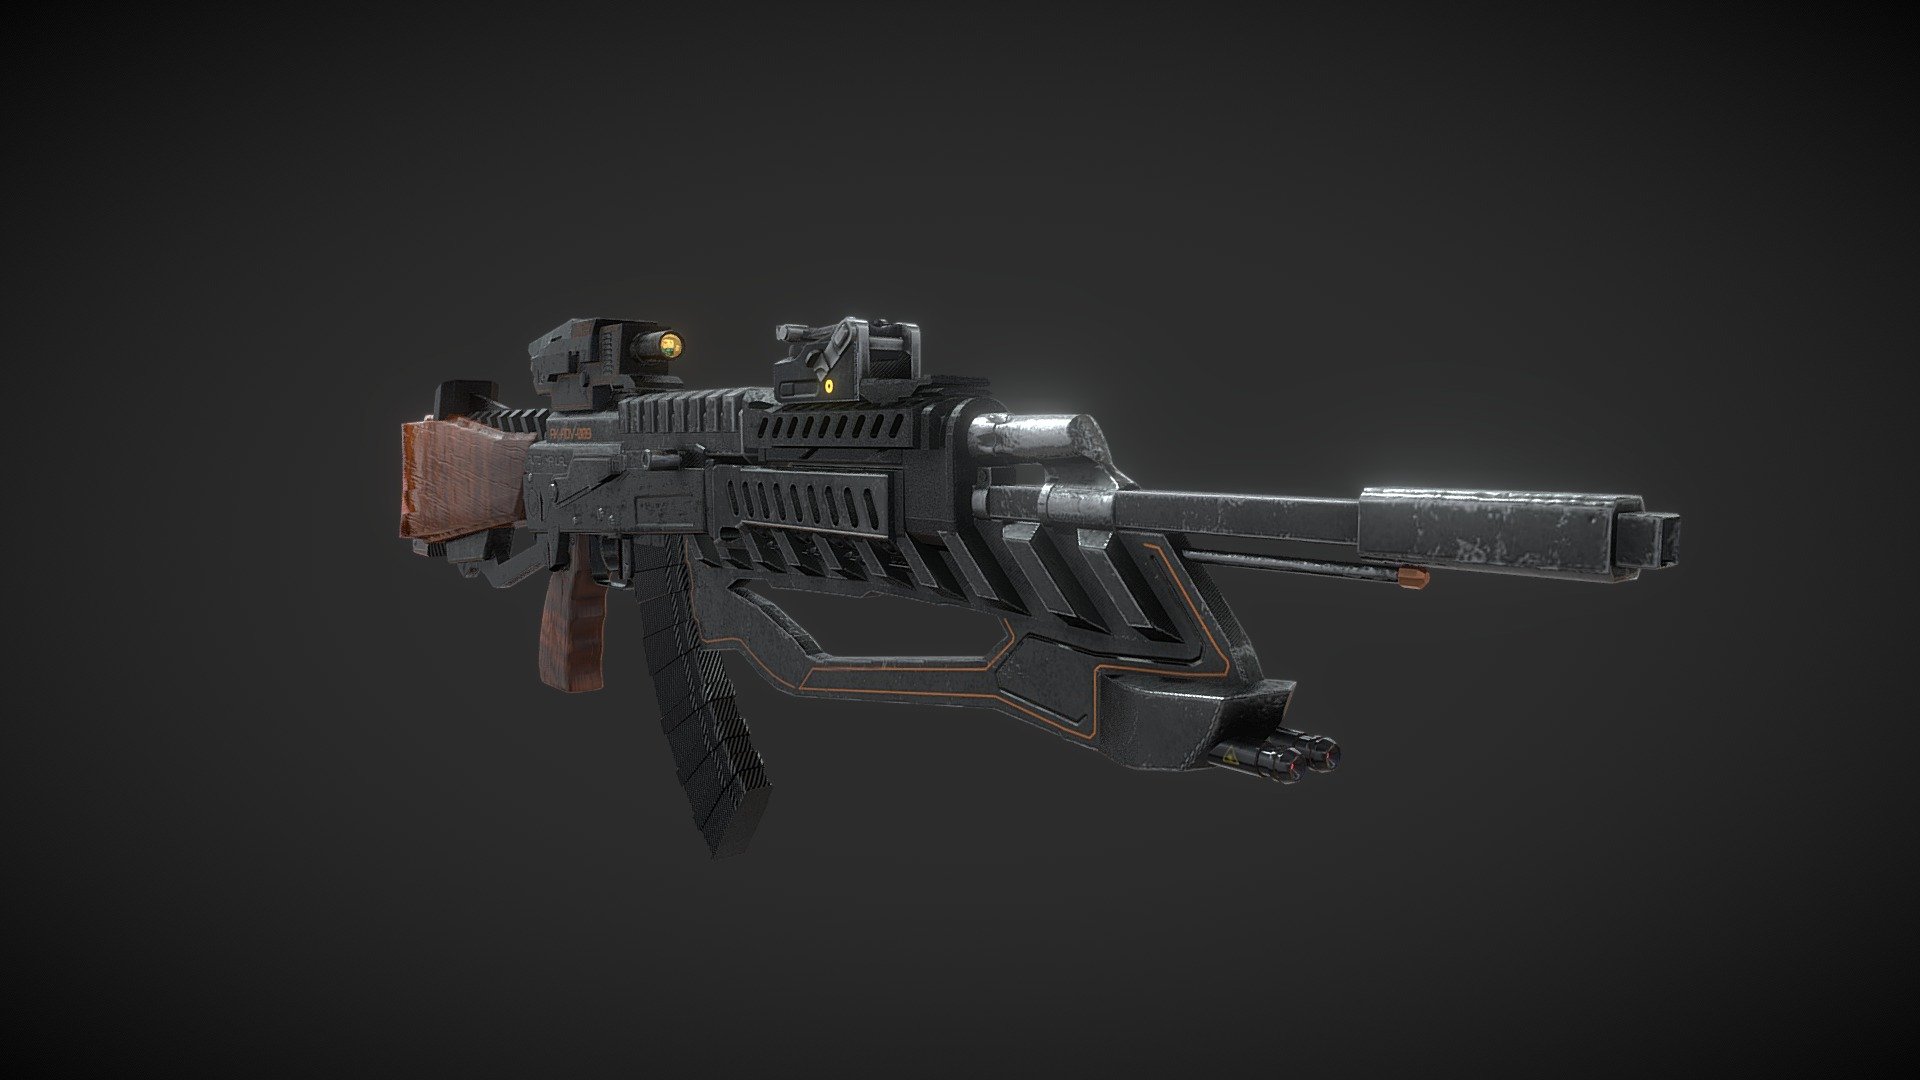 AK47 -Advanced Tactical Weaponary  For Games
Weapon Description:- AK-47 ADVANCED TACTICAL
WEAPON Model Numer : AK ADV 009
SCOPE : Combat Ready Scope
SCOPE Field: N/A
LCD Dsiplay : Counter Clock / Ammunition Display
Granade Launcher : N/A
Manufacturer: 3D World Weapon


Designed By : Vijayasarathi
Mid  Poly Model With 2K Texture / Single Layout UV For Game Integration / film production , Geometries are seperable Materials and Textures
Meshes can be seperated and rigged according to your requirements of your projects
Shoulder Rest Handle Can Be Hidden To Reveald Diffrent design
This AK-47-Advanced  Can Be can be used FPS/TPS Style Games (Ease of USe) and for Sci- Fi Movie Production
Clients and customers who uses this model for your work of art please give your valuable Review and inputs Note : Scopes and Accessories Available on Request.

Please Give Your Valuable Feedback AfterPurchase Which Will Help ! don’t forget to give your ratings and hit those stars would really appriciate it thanks in advance 3d model